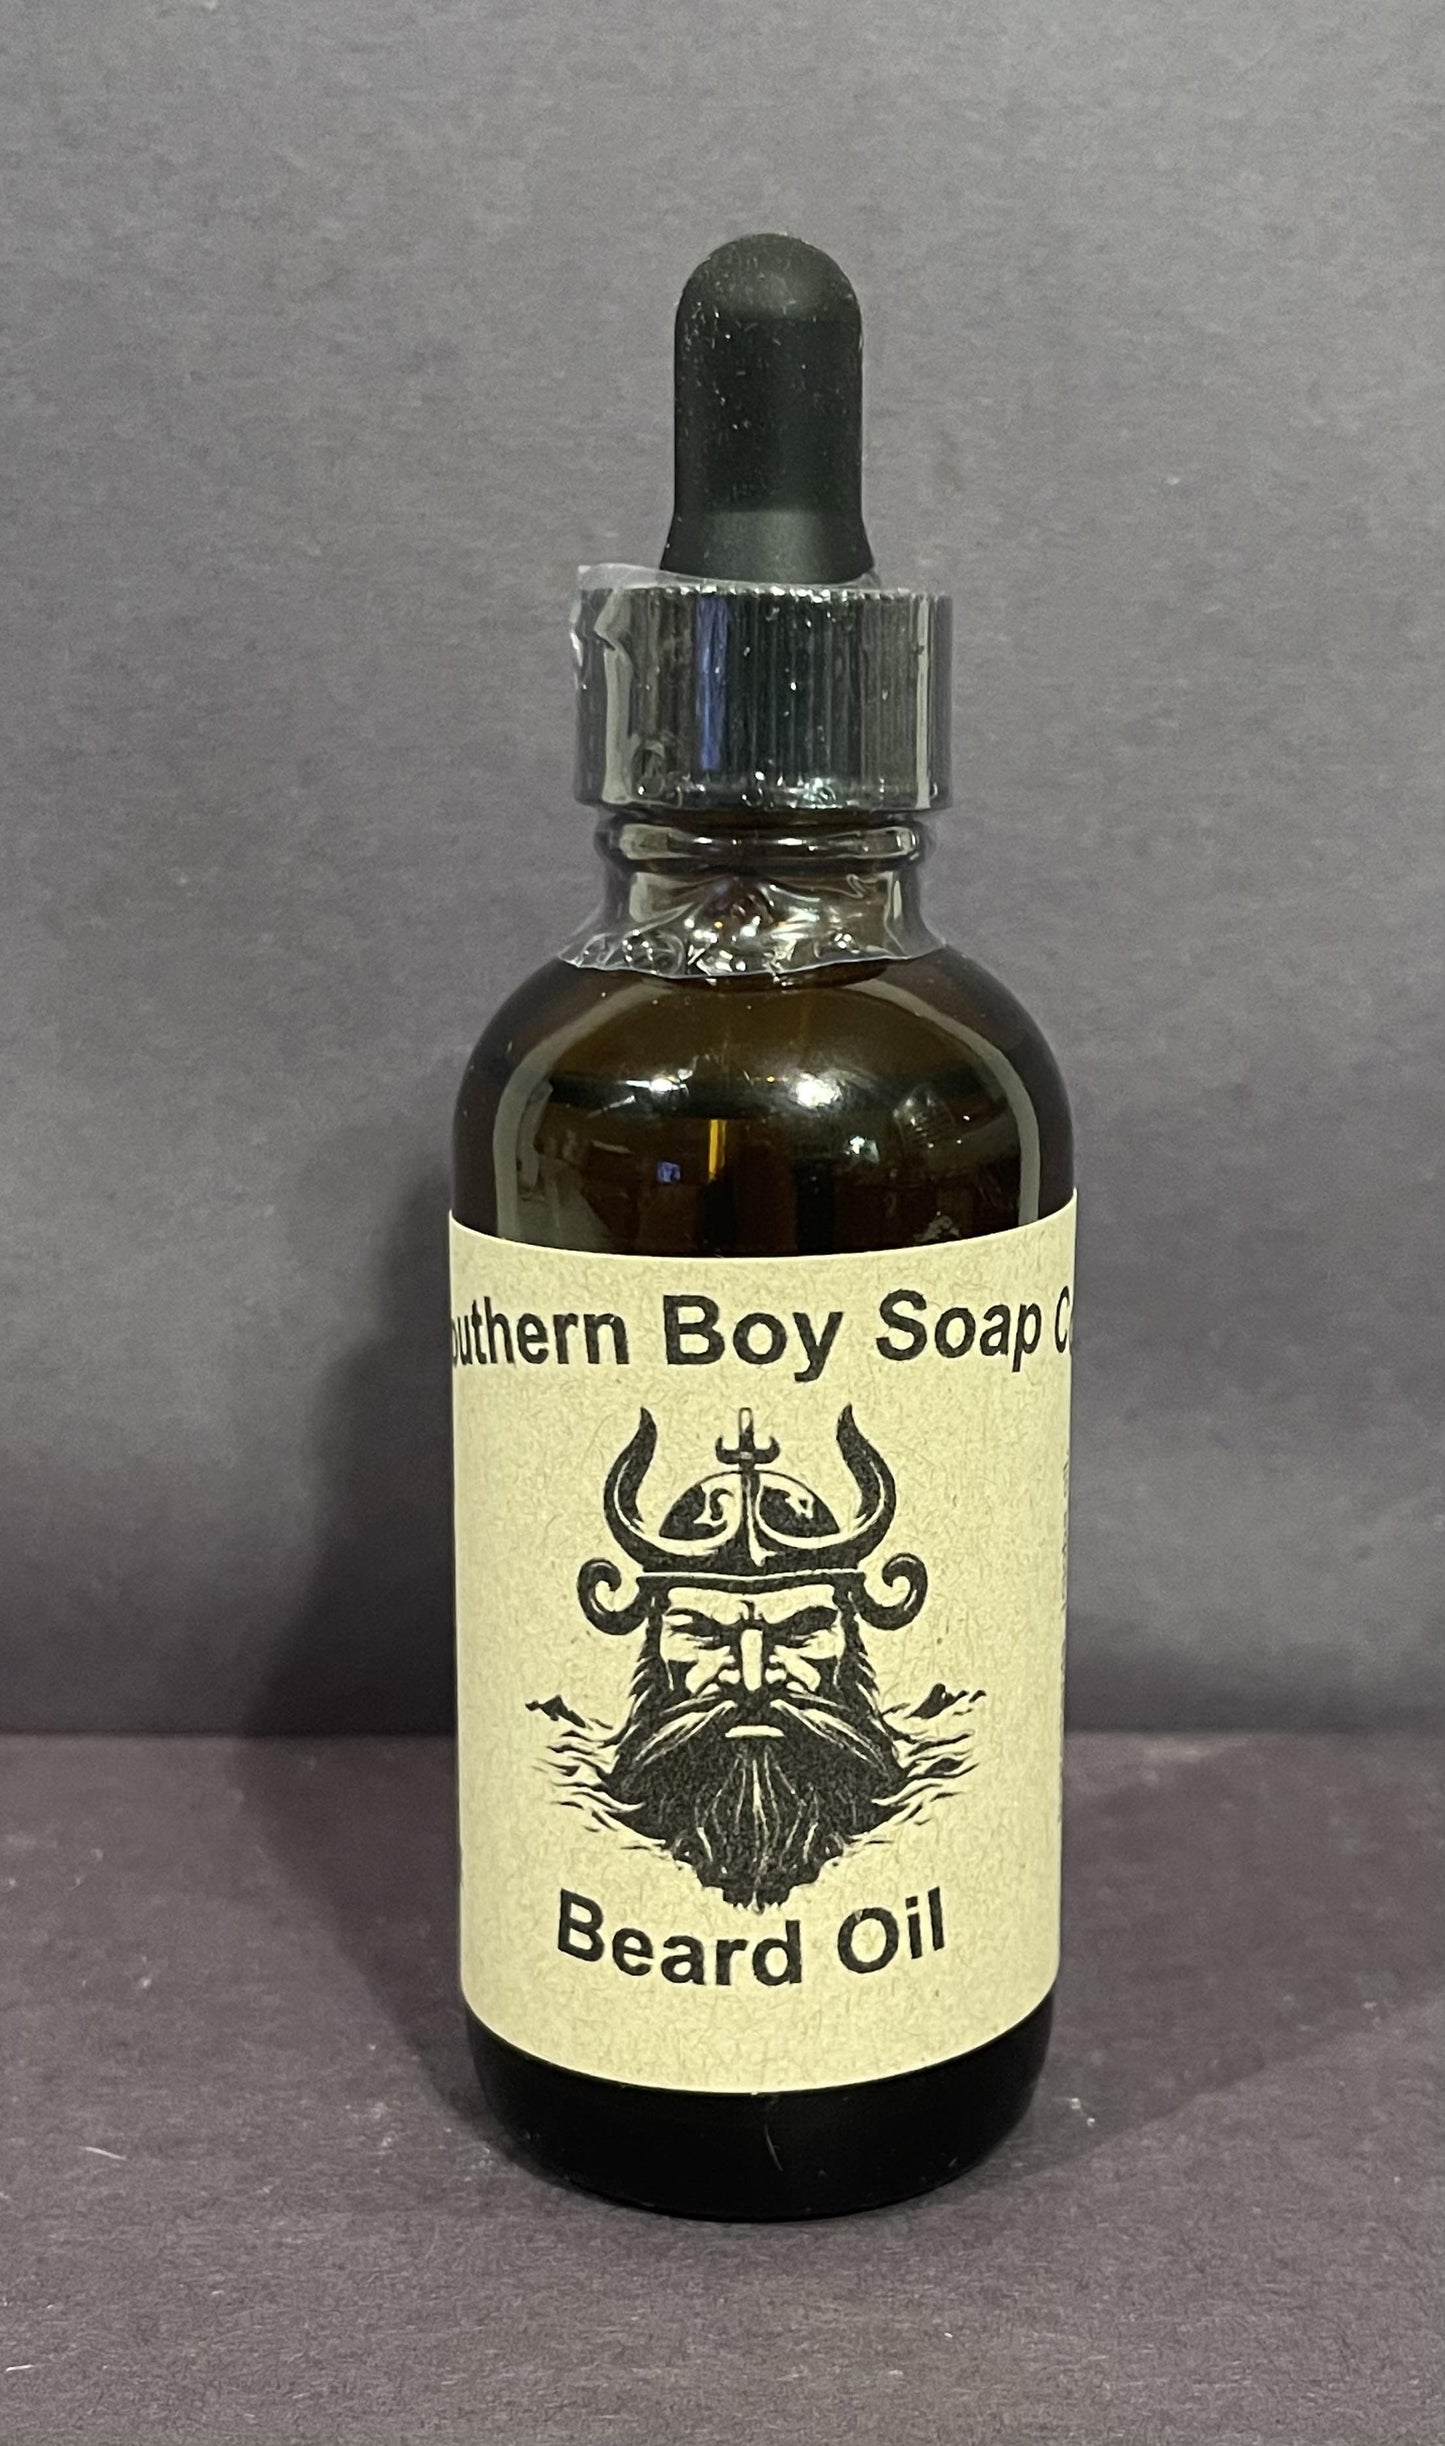 Into The Woods scented Premium Beard Oil